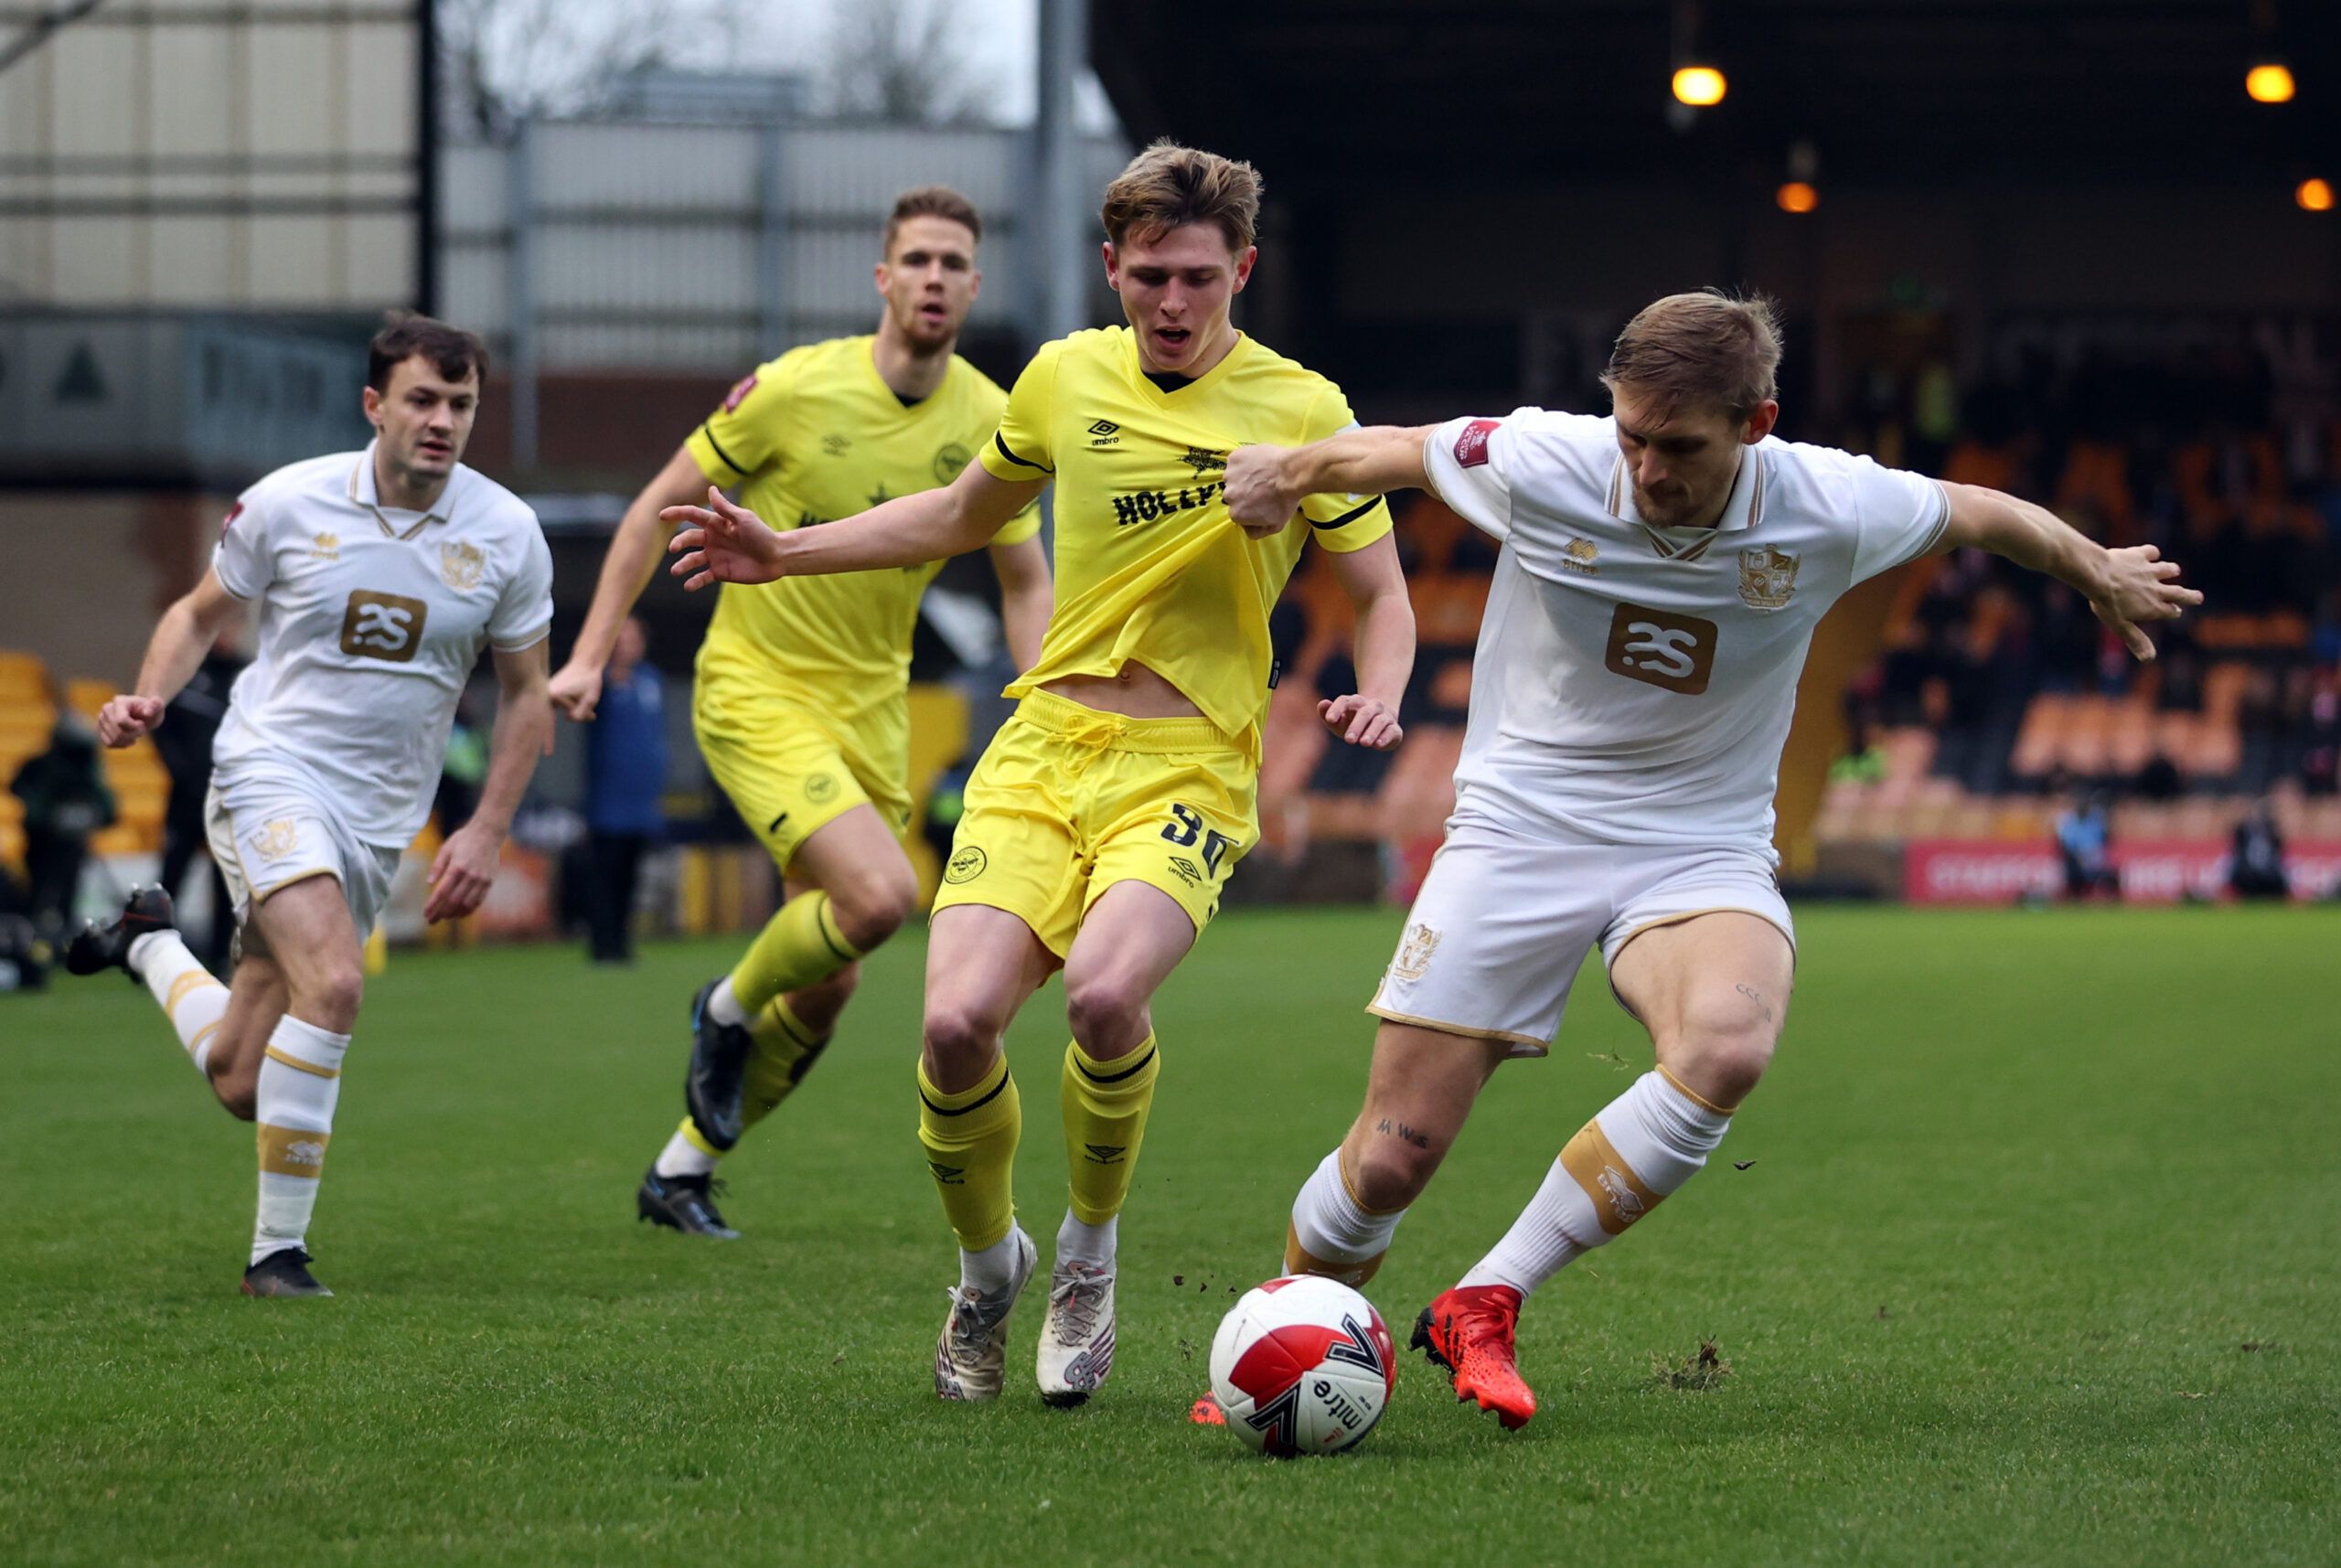 Soccer Football - FA Cup Third Round - Port Vale v Brentford - Vale Park, Stoke-on-Trent, Britain - January 8, 2022  Port Vale's Nathan Smith in action with Brentford's Finley Stevens Action Images via Reuters/Molly Darlington